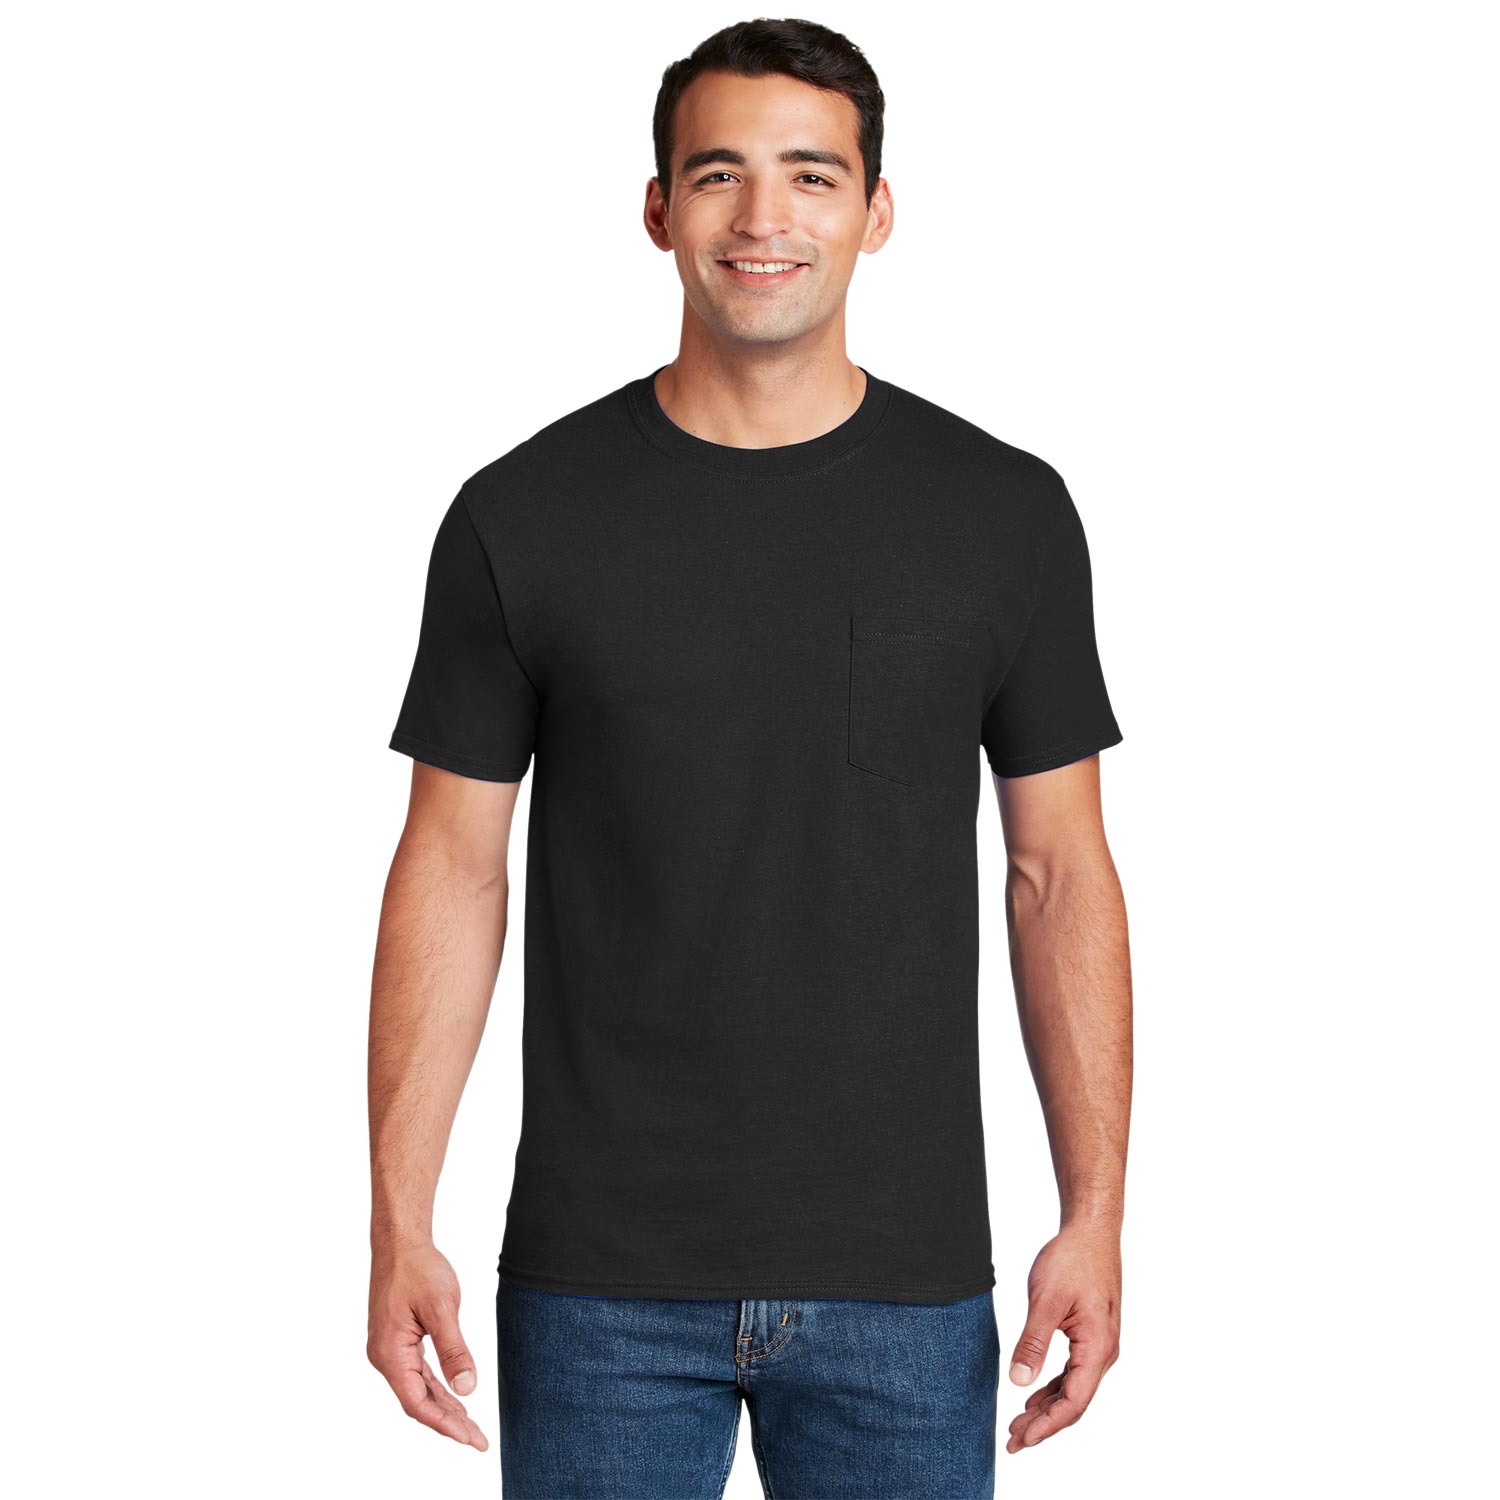 SANMAR HANES BEEFY COTTON T-SHIRT WITH POCKET